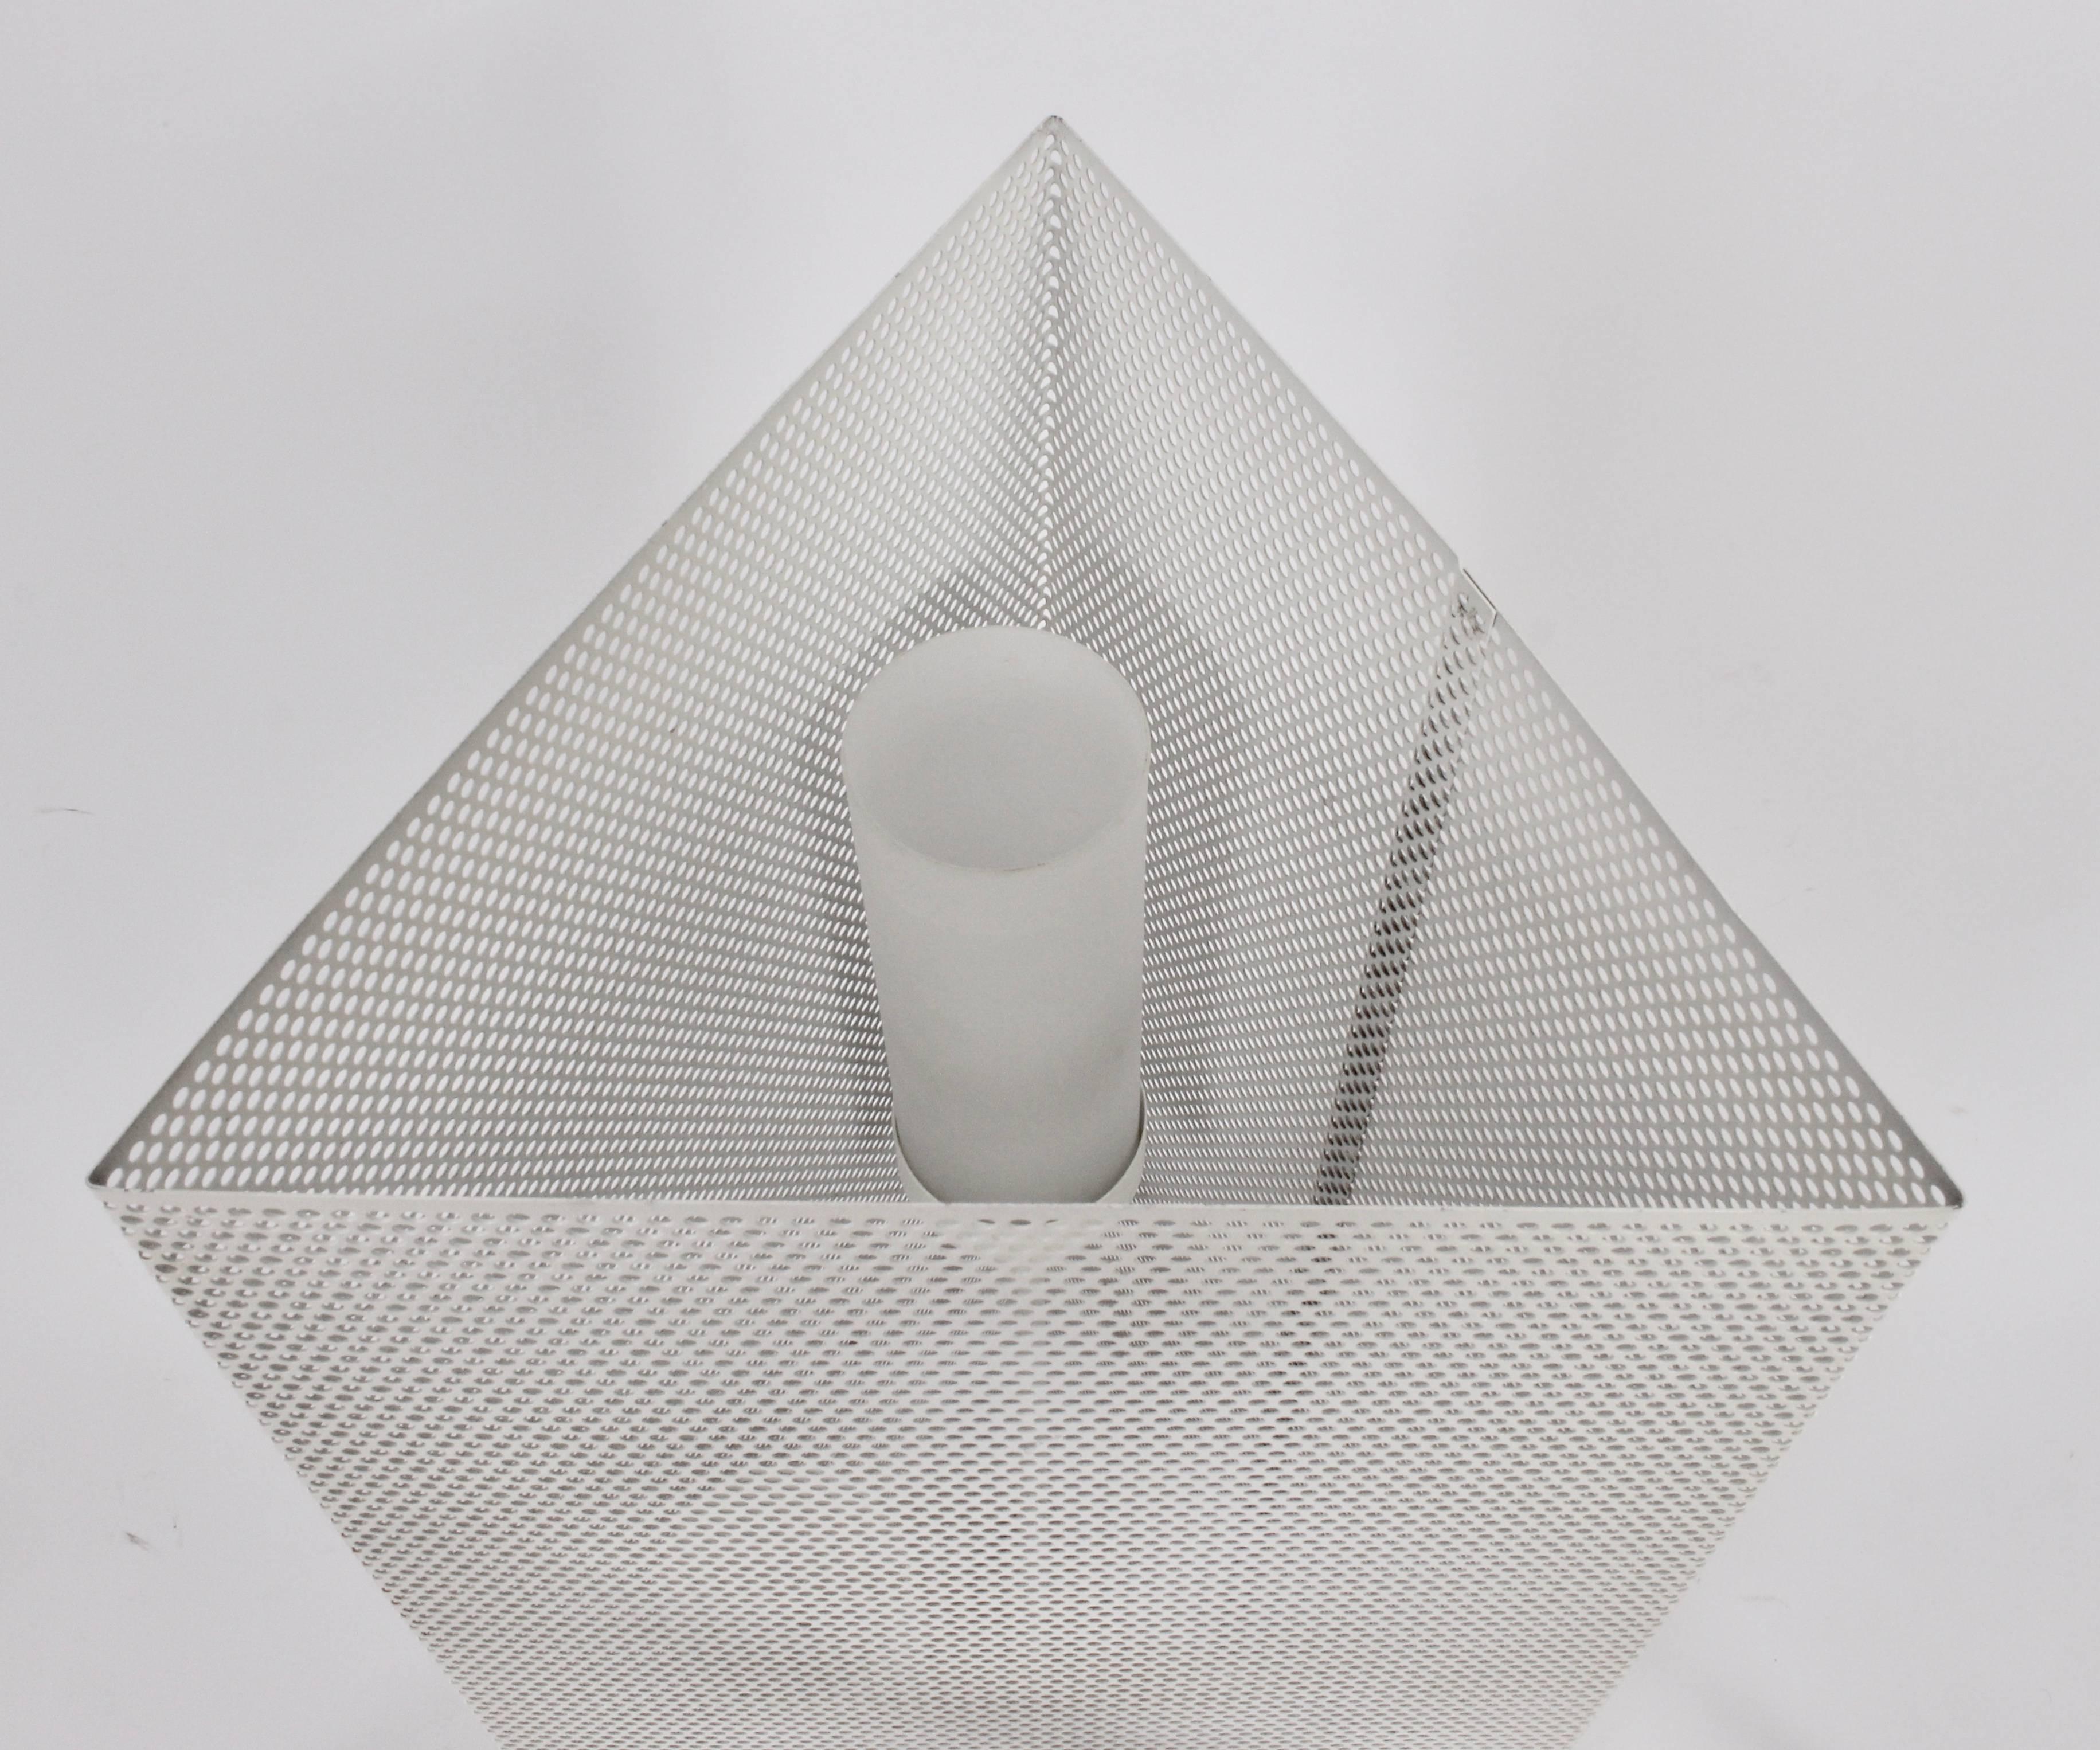 American Pierced White Enamel Triangular Lamp with Three White Glass Shades, 1960s For Sale